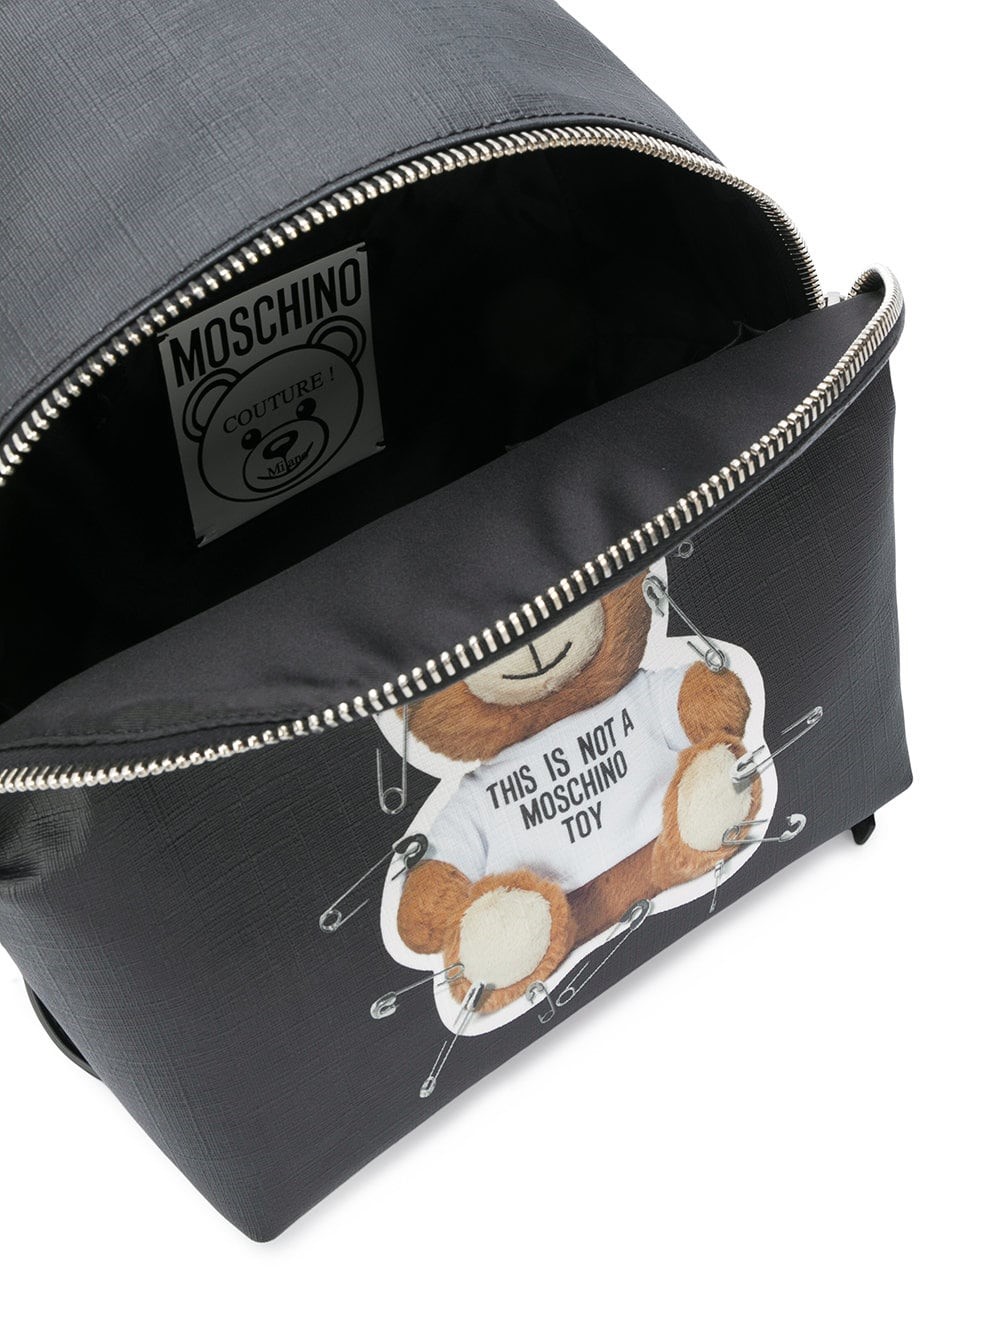 moschino TEDDY BEAR BACKPACK available on montiboutique.com - 23995